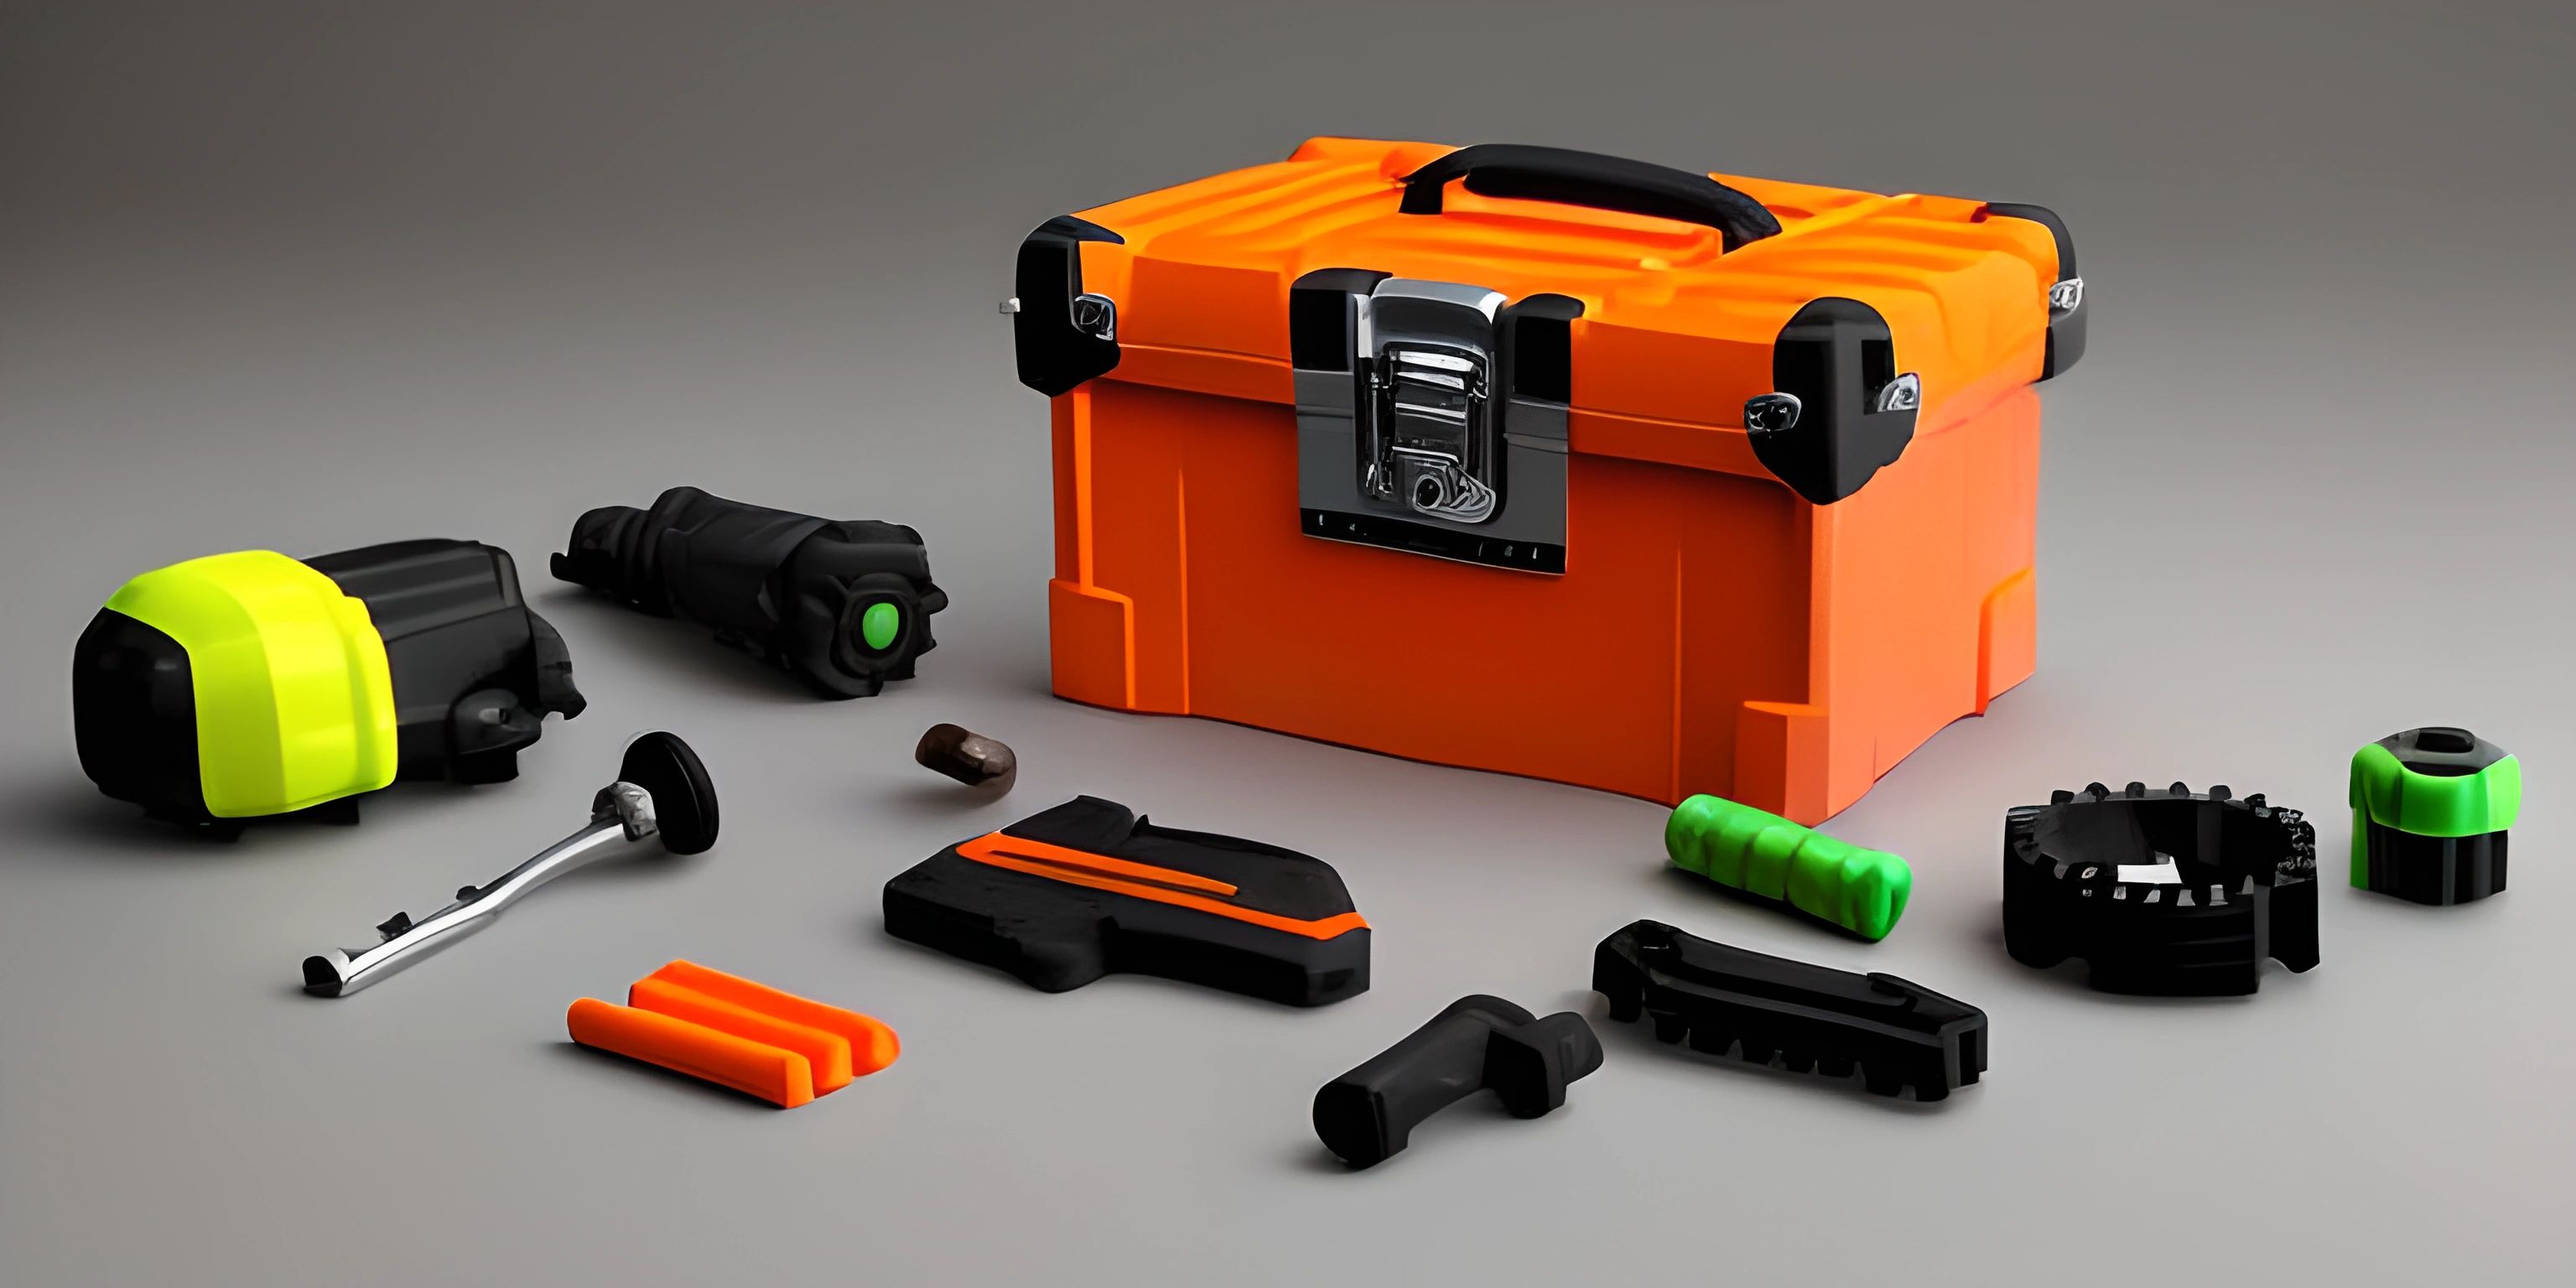 a small orange box has tools on top of it next to a tool set with a drill, hammer and a couple other tools